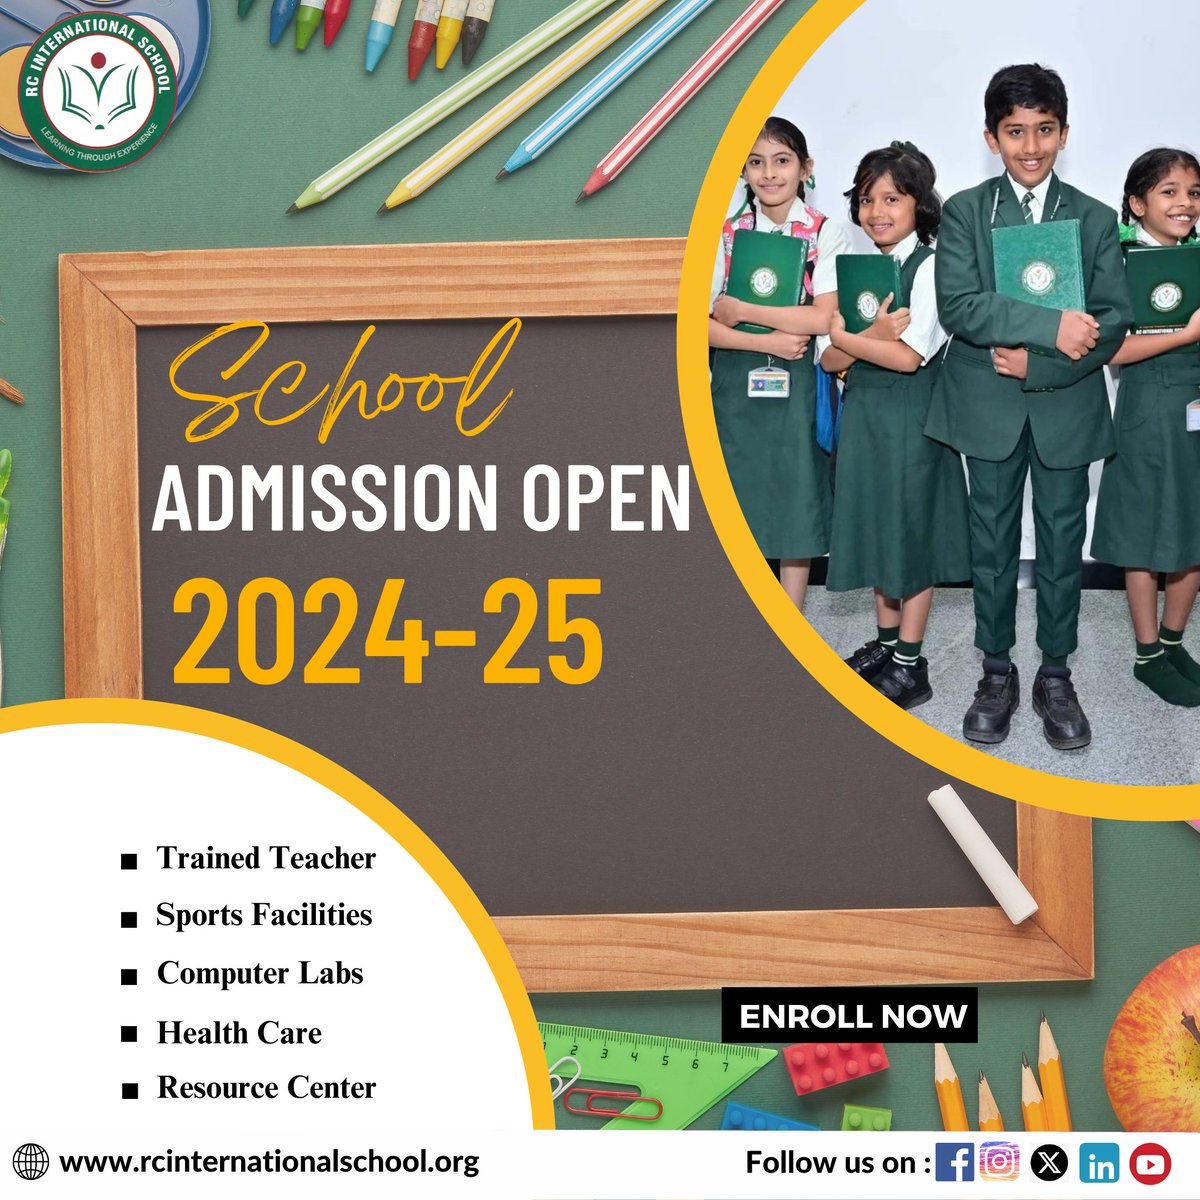 Choose a school 🏤that focuses on quality education, personal growth, and character development - choose👉 RC International school
Visit us:- rcinternationalschool.org
Call us for admission inquiries:-+91-9964693066,+91-8105983861
#AdmissionsOpen #RCschool2024 #SchoolLife